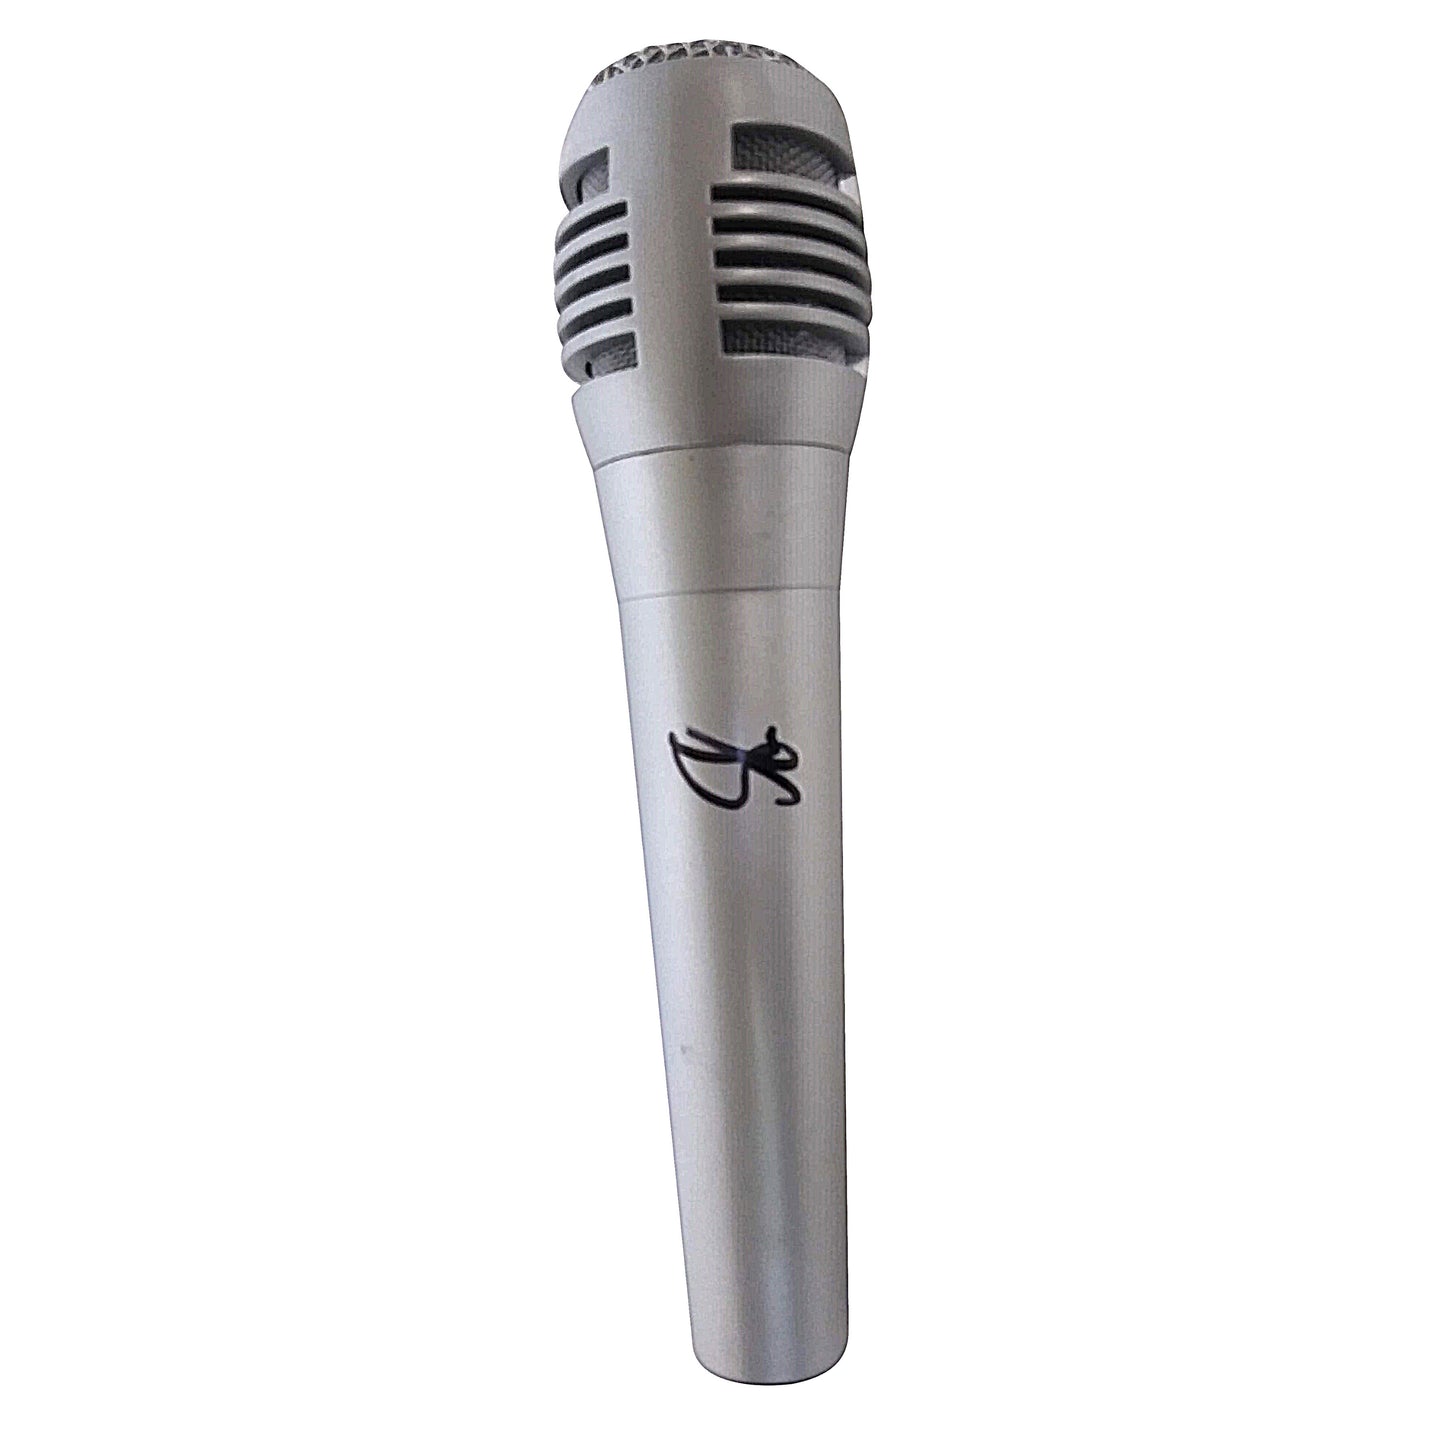 Microphones- Autographed- Shay Mooney Signed Pyle Microphone - Dan plus Shay - Proof Photo - Beckett BAS 103